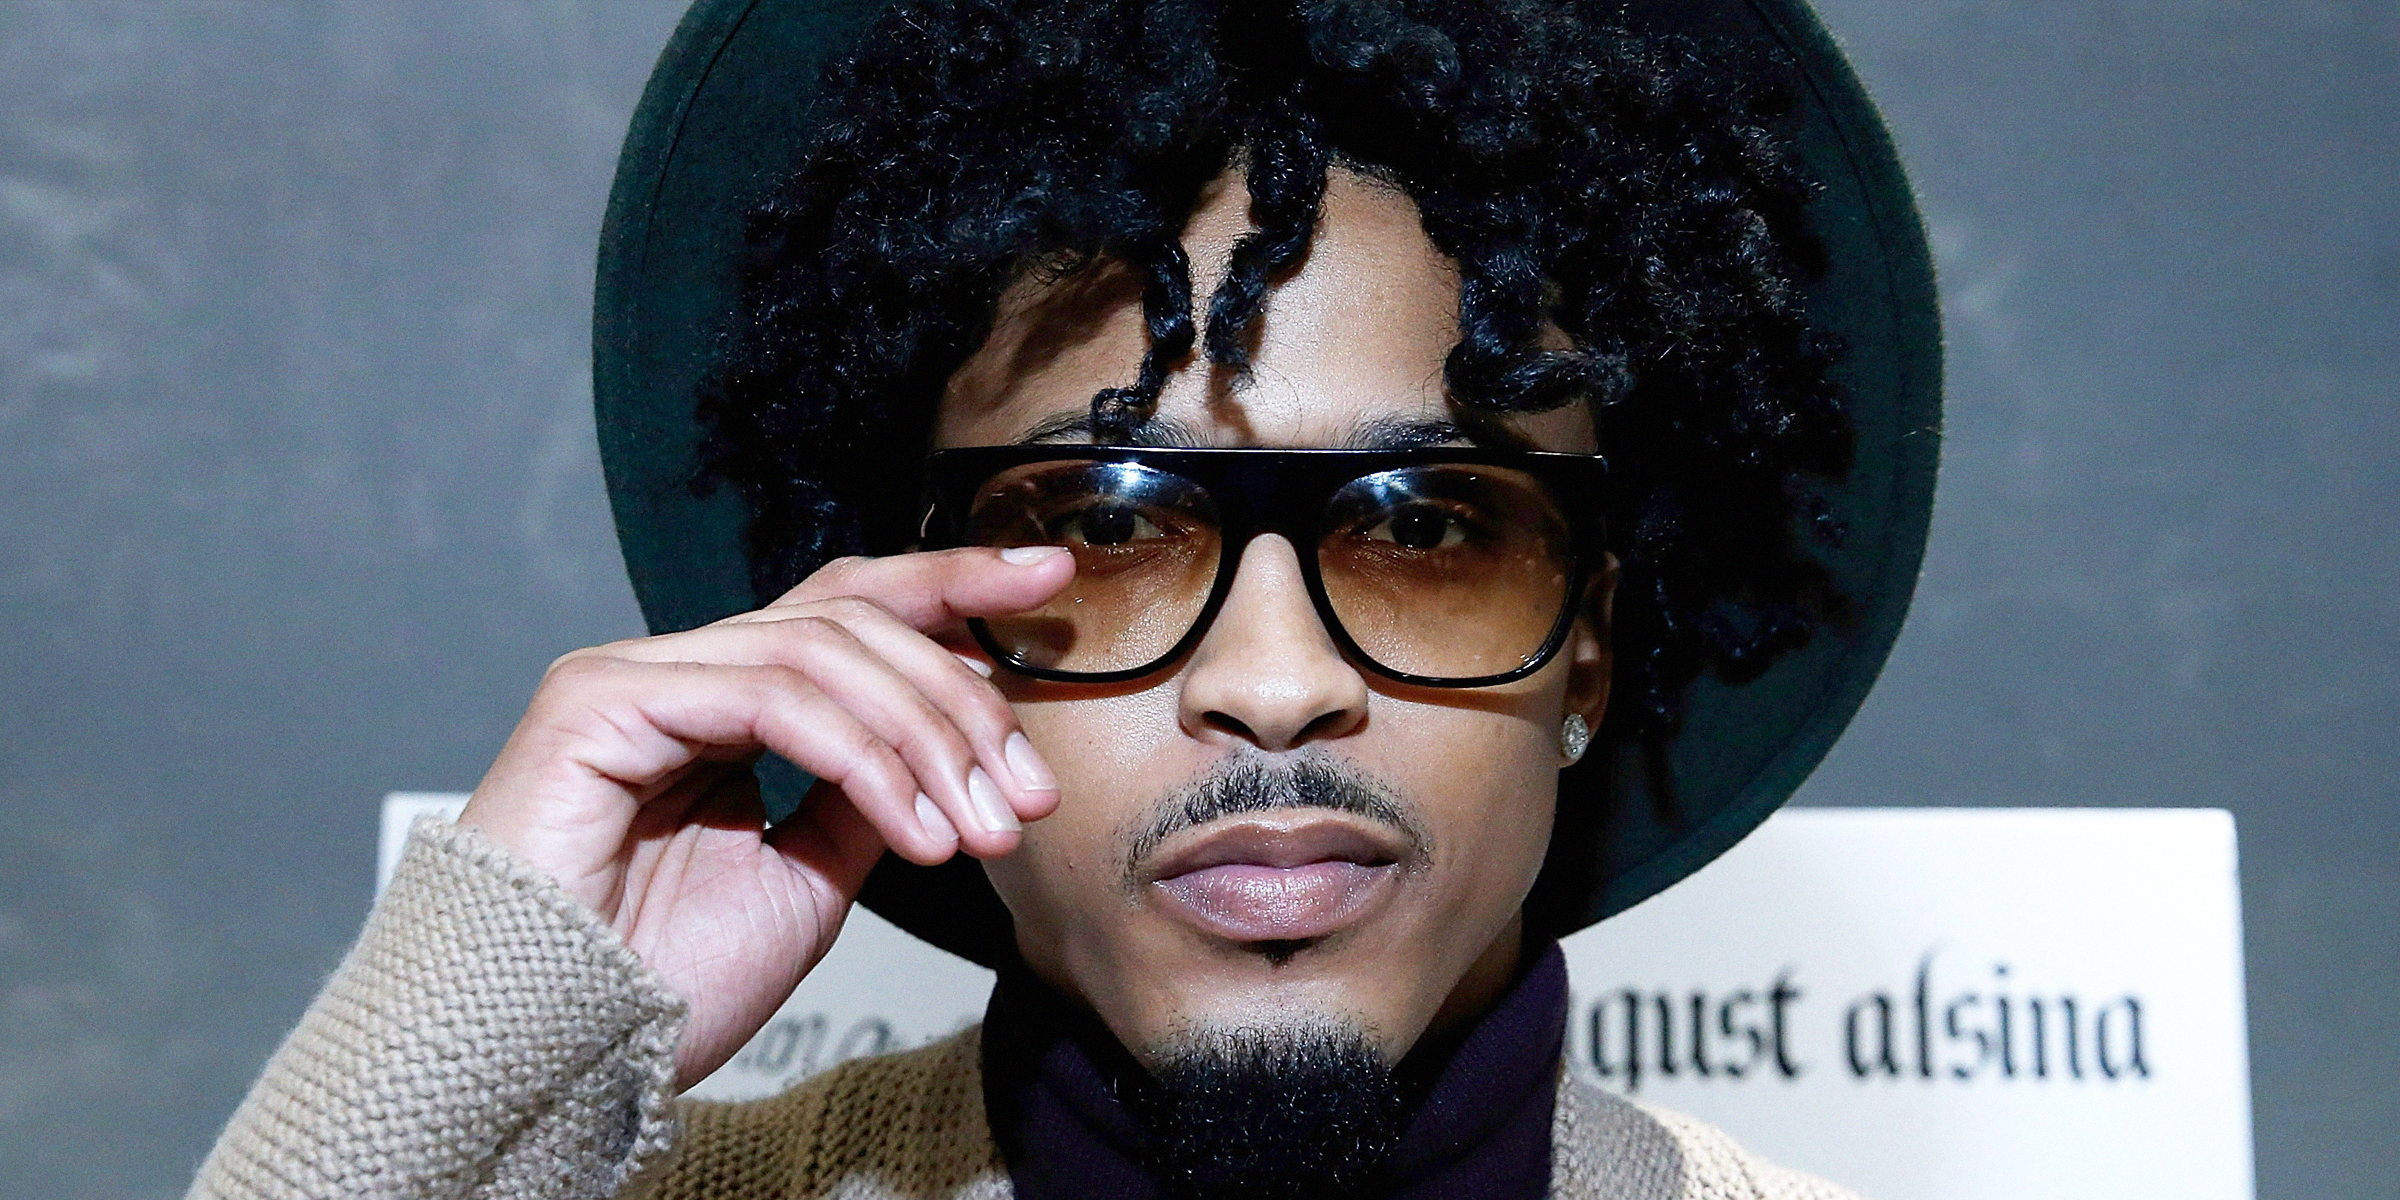 August Alsina | Source: Getty Images